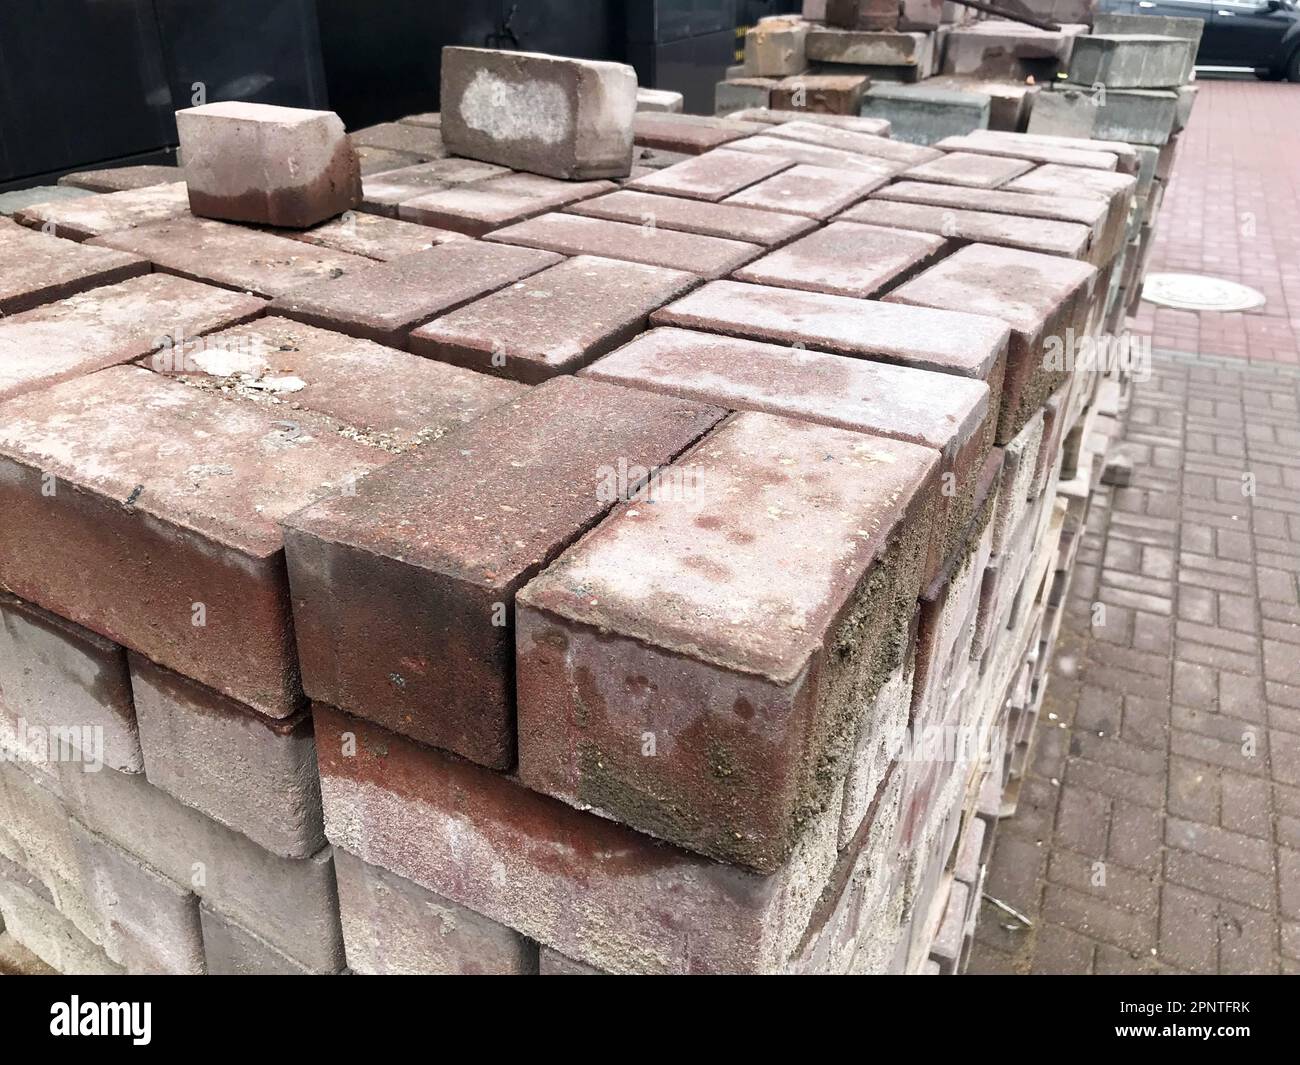 Paving stone red cement tile for laying road construction, pavement on wooden pallets at a construction site. Stock Photo